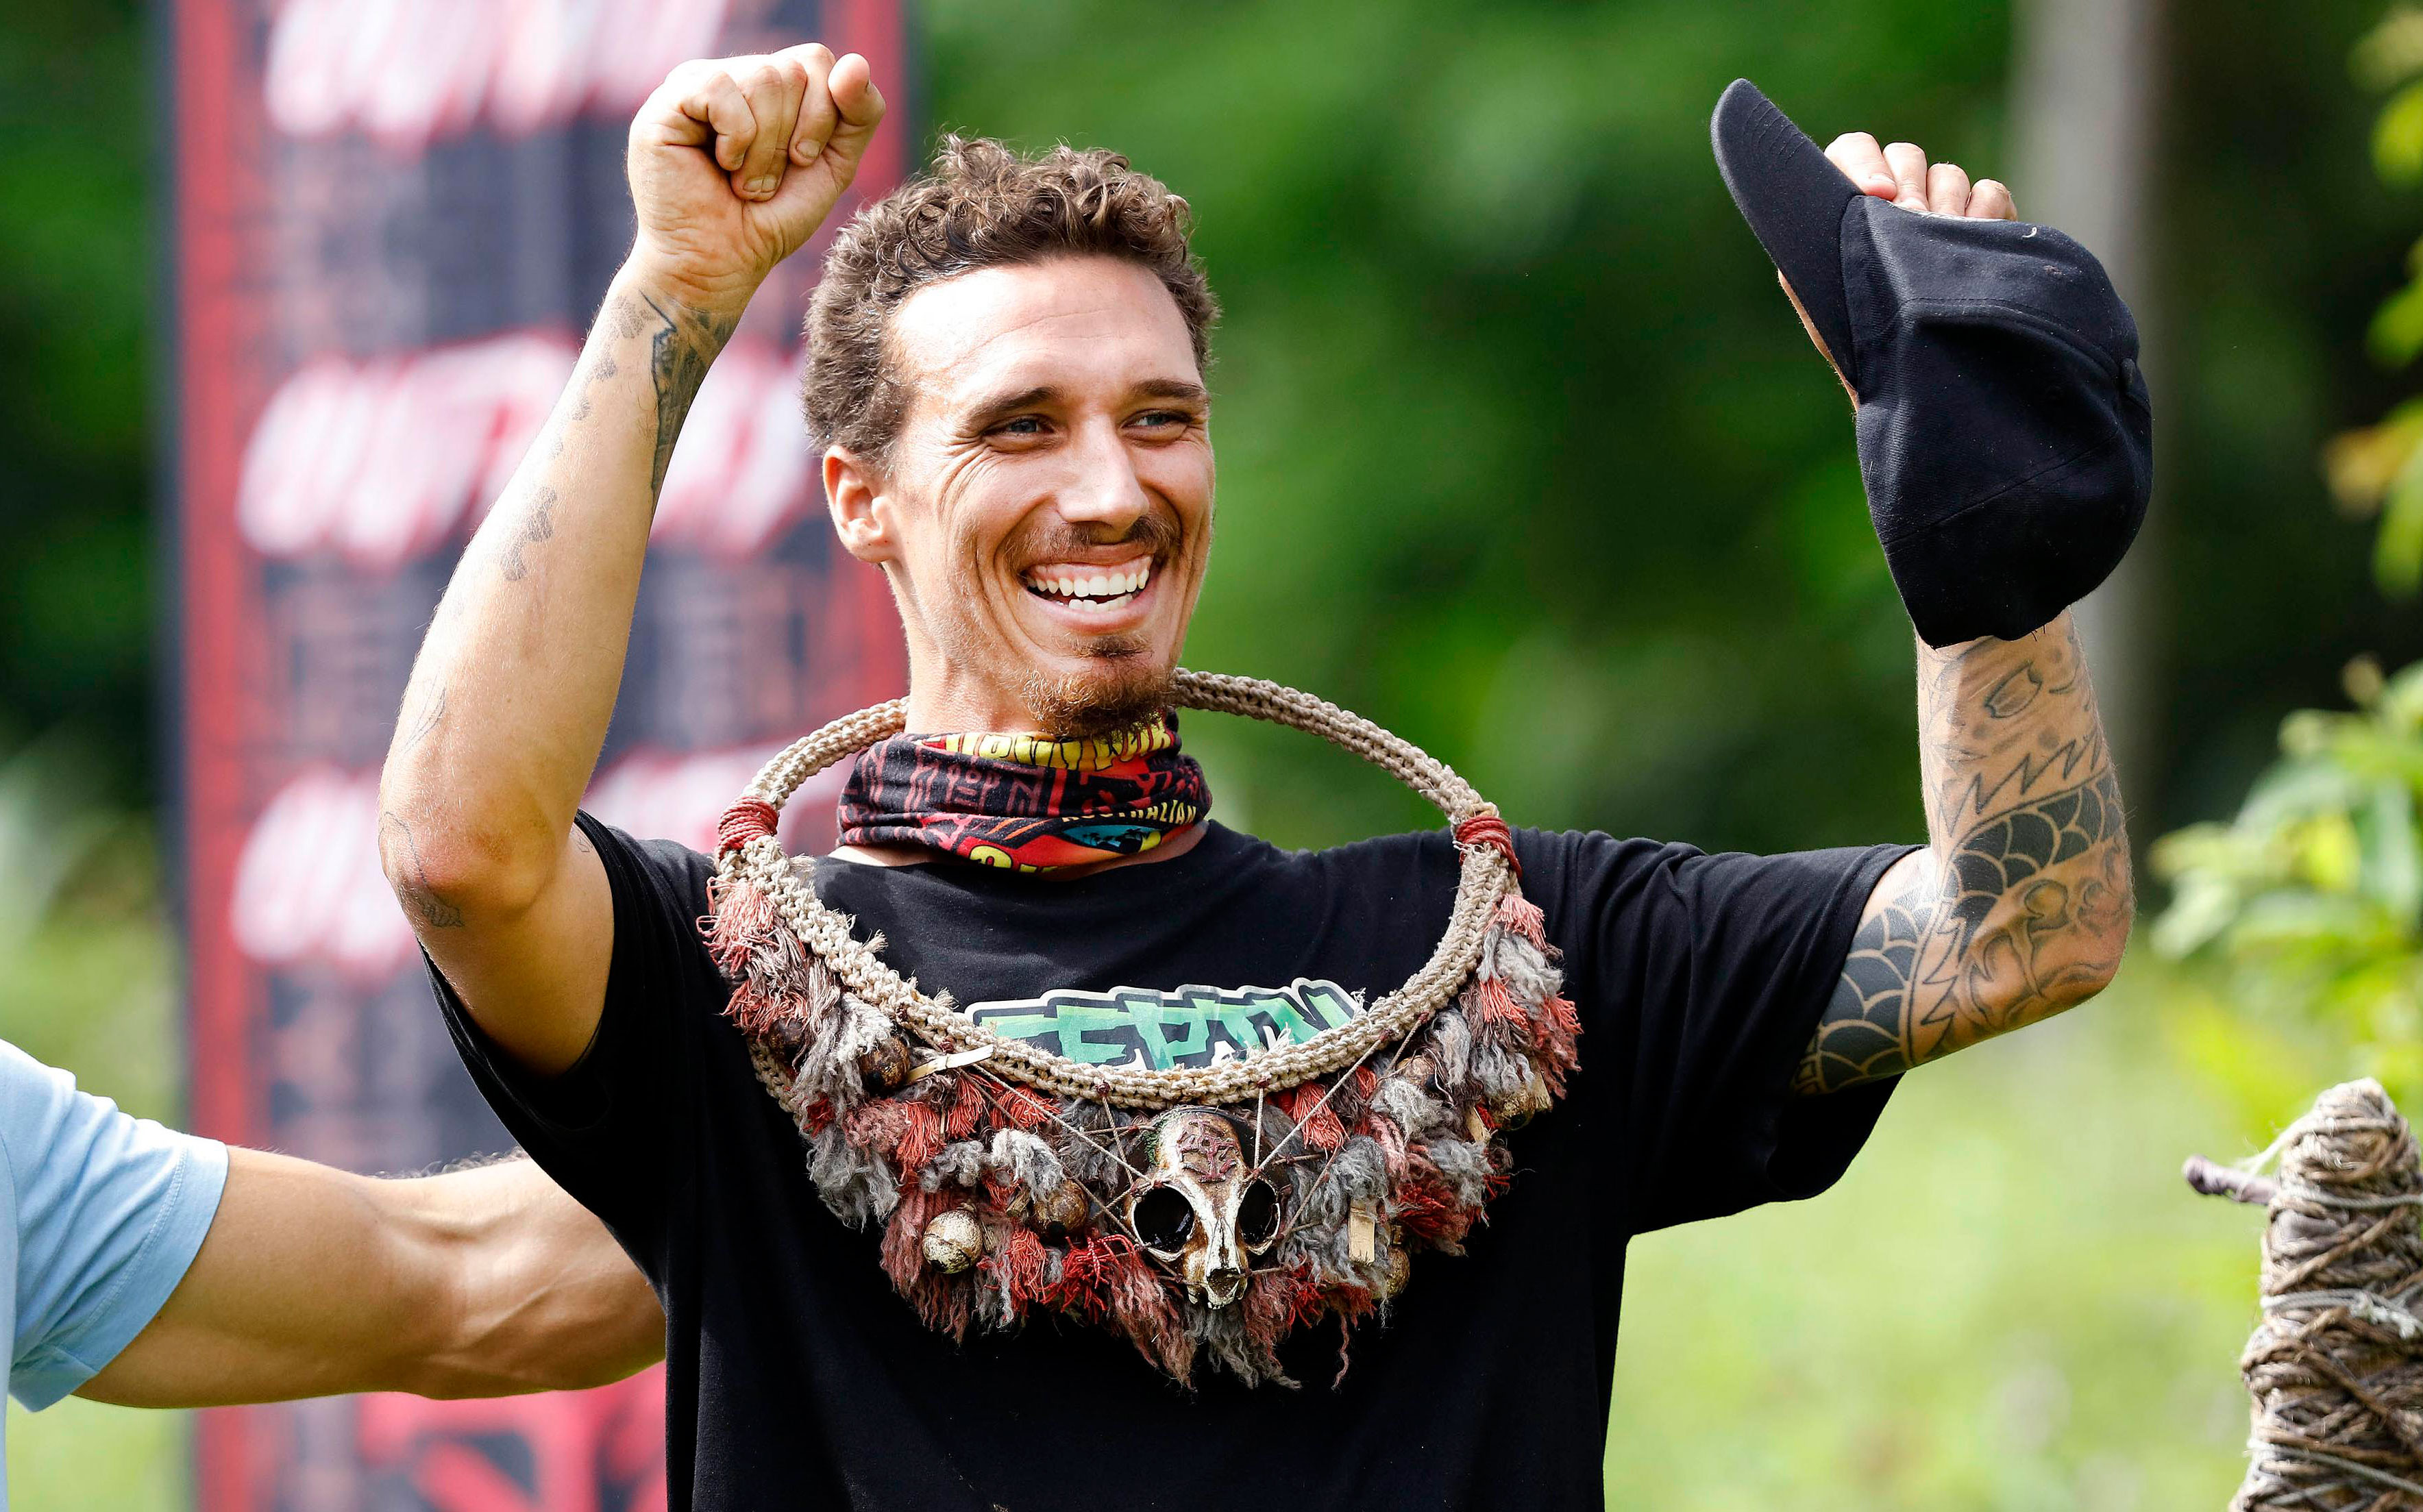 Fans Have Raised $508k, More Than The ’Survivor’ Prize Money, For King Of The Jungle Luke